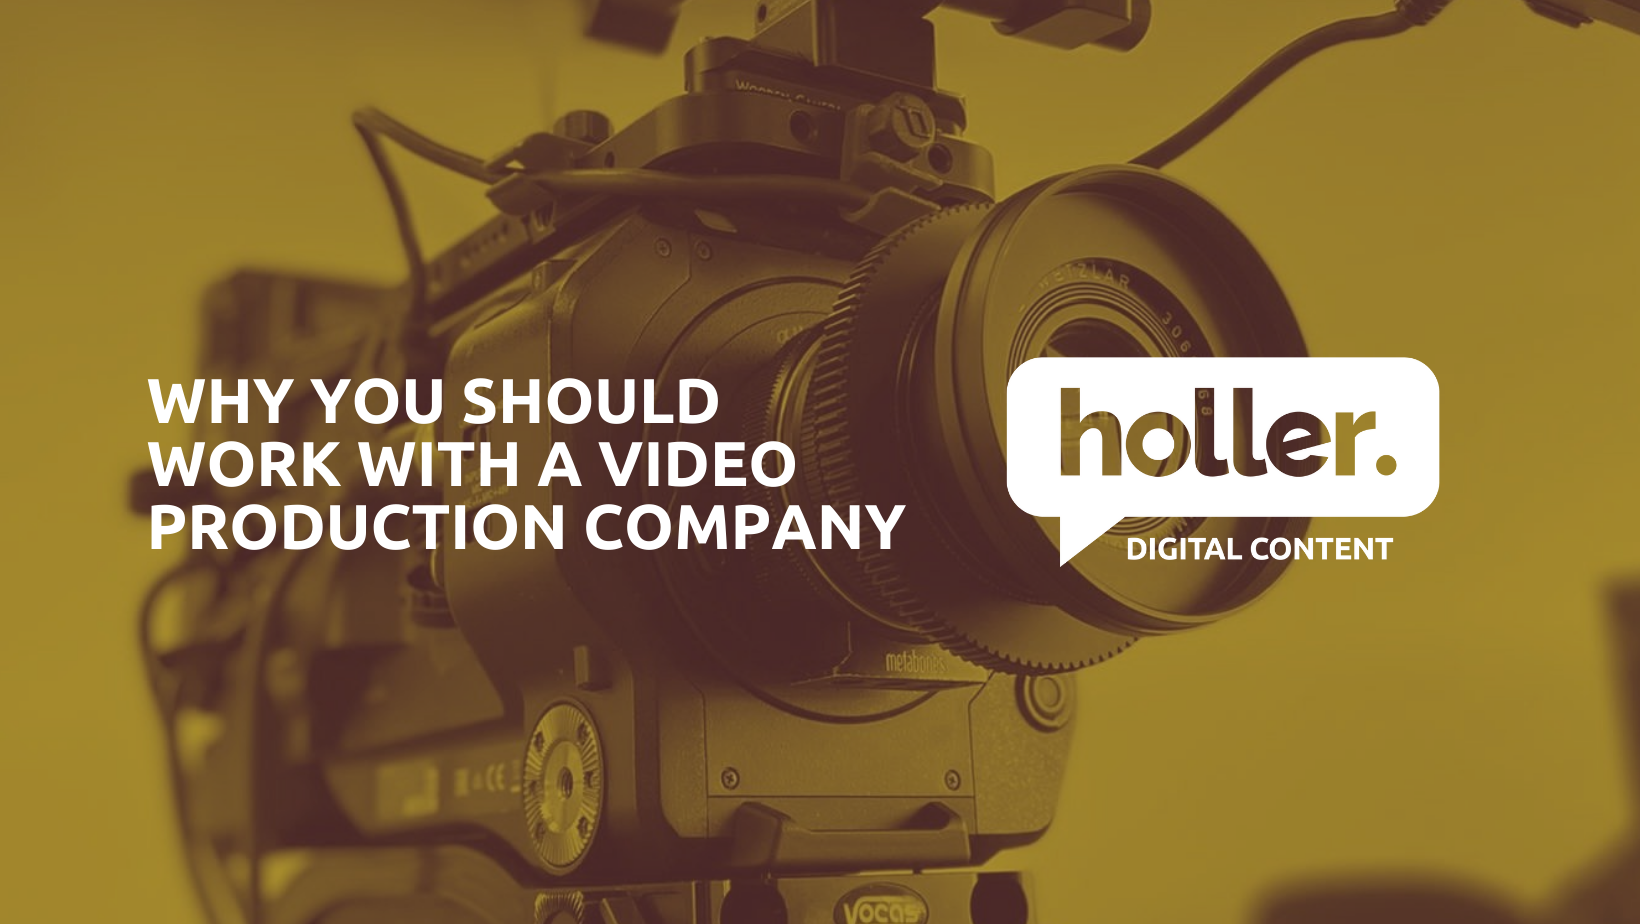 WHY YOU SHOULD WORK WITH A VIDEO PRODUCTION COMPANY